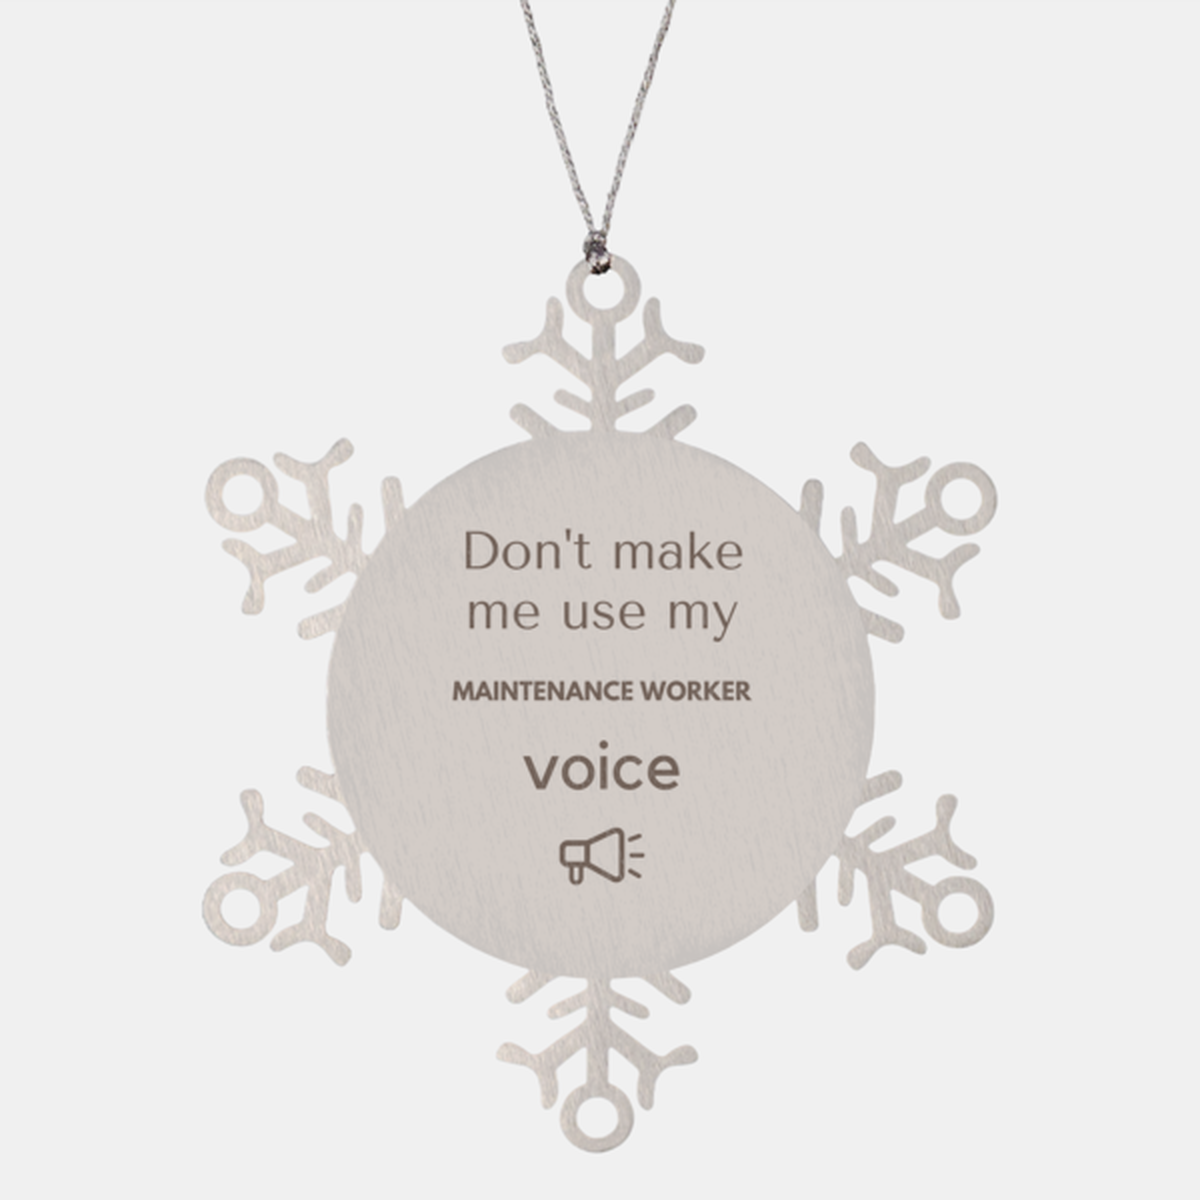 Don't make me use my Maintenance Worker voice, Sarcasm Maintenance Worker Ornament Gifts, Christmas Maintenance Worker Snowflake Ornament Unique Gifts For Maintenance Worker Coworkers, Men, Women, Colleague, Friends